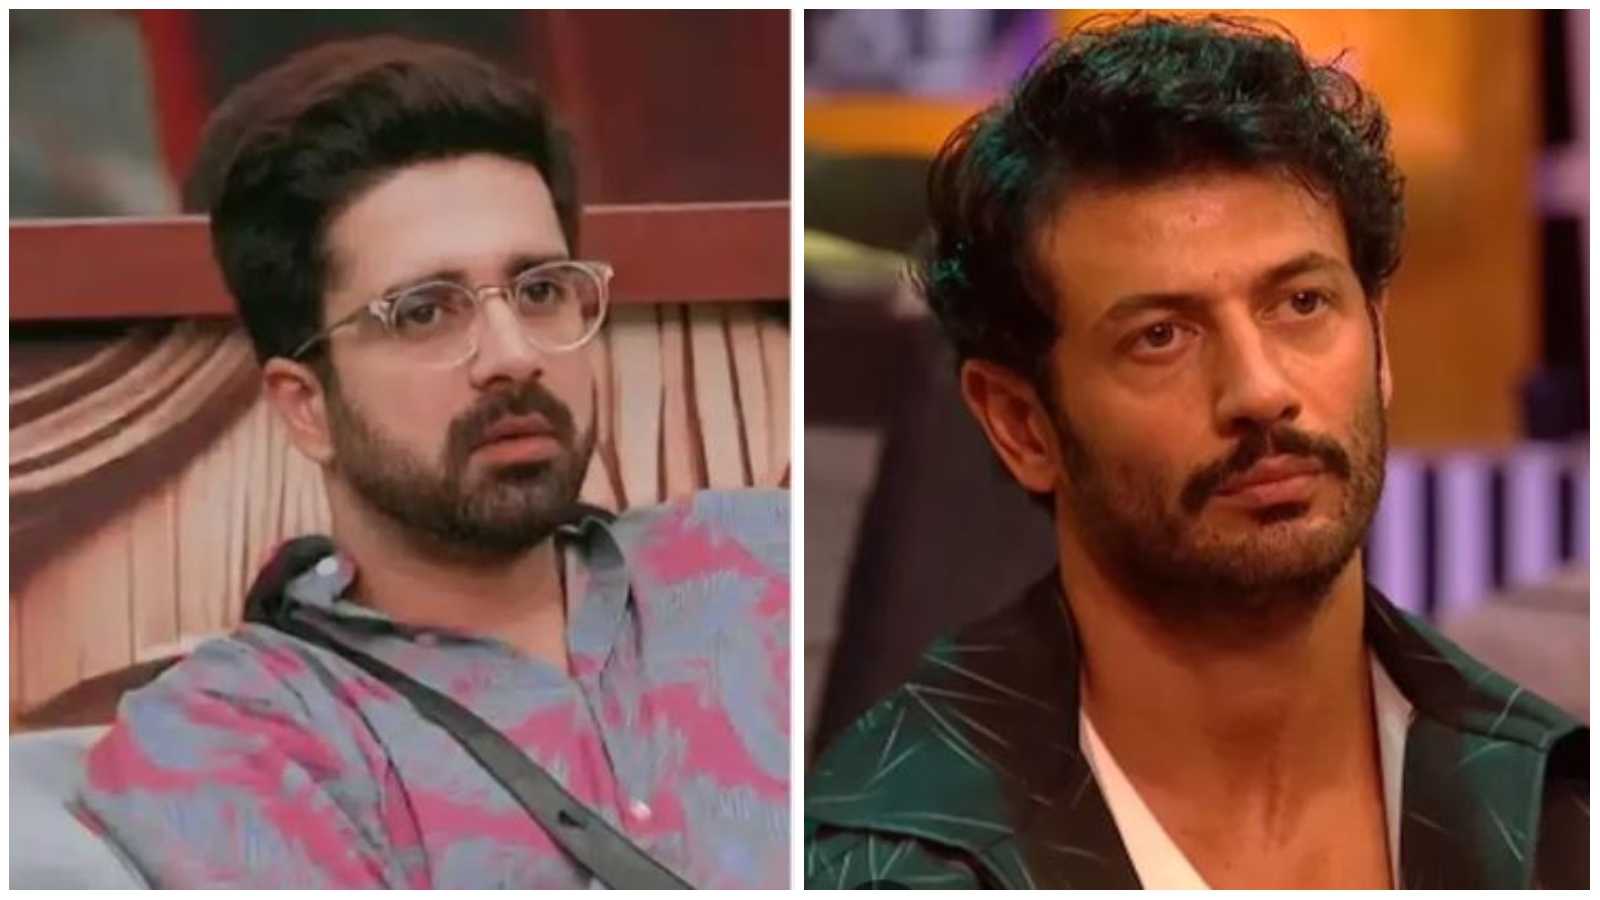 Bigg Boss OTT 2: Will Avinash Sachdev be evicted along with Jad Hadid in double elimination ahead of finale week?